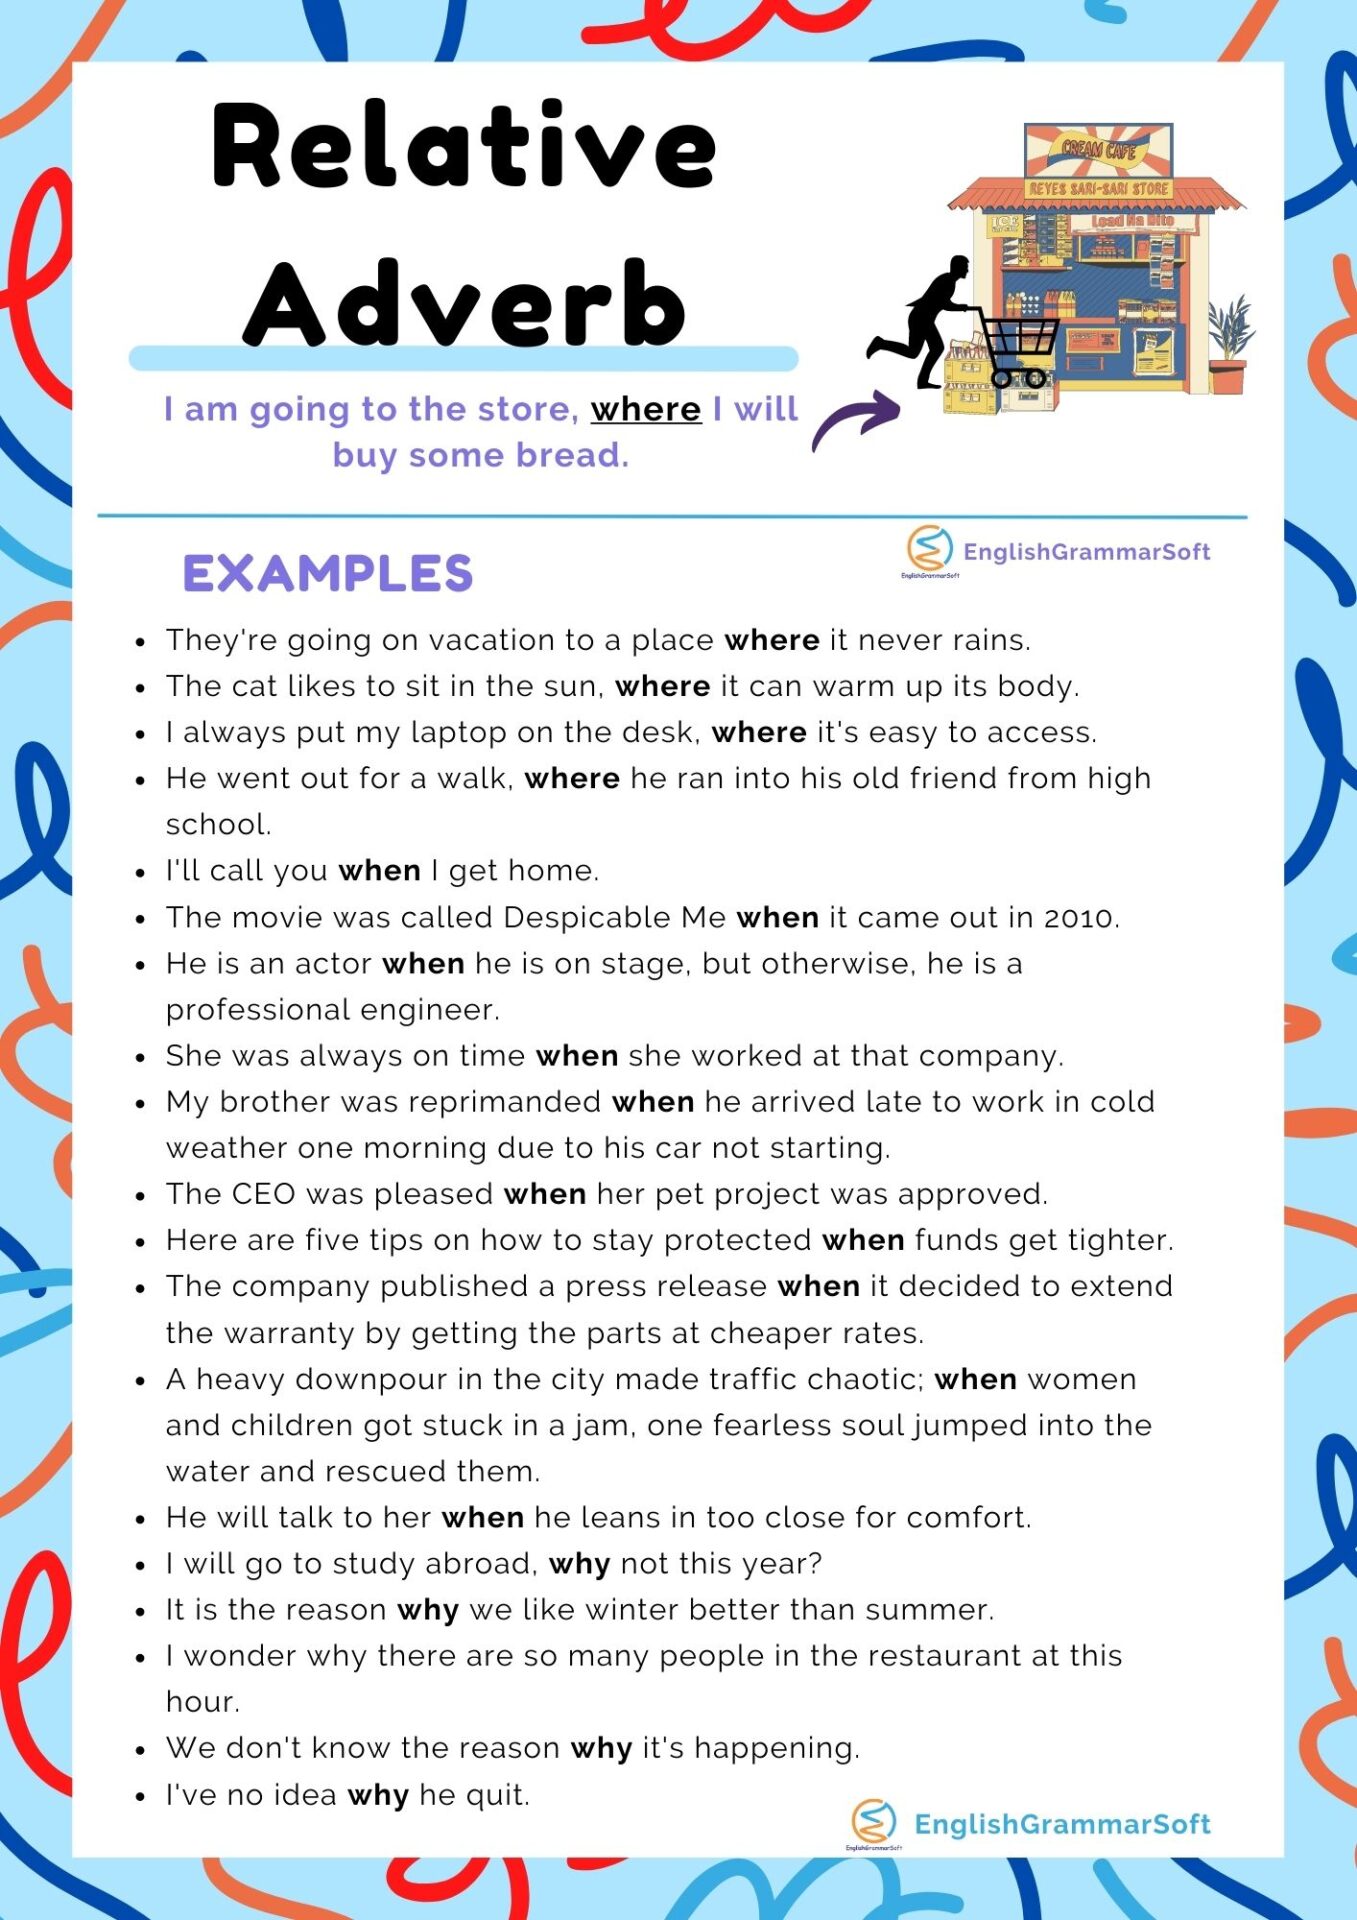 Relative Adverb Examples